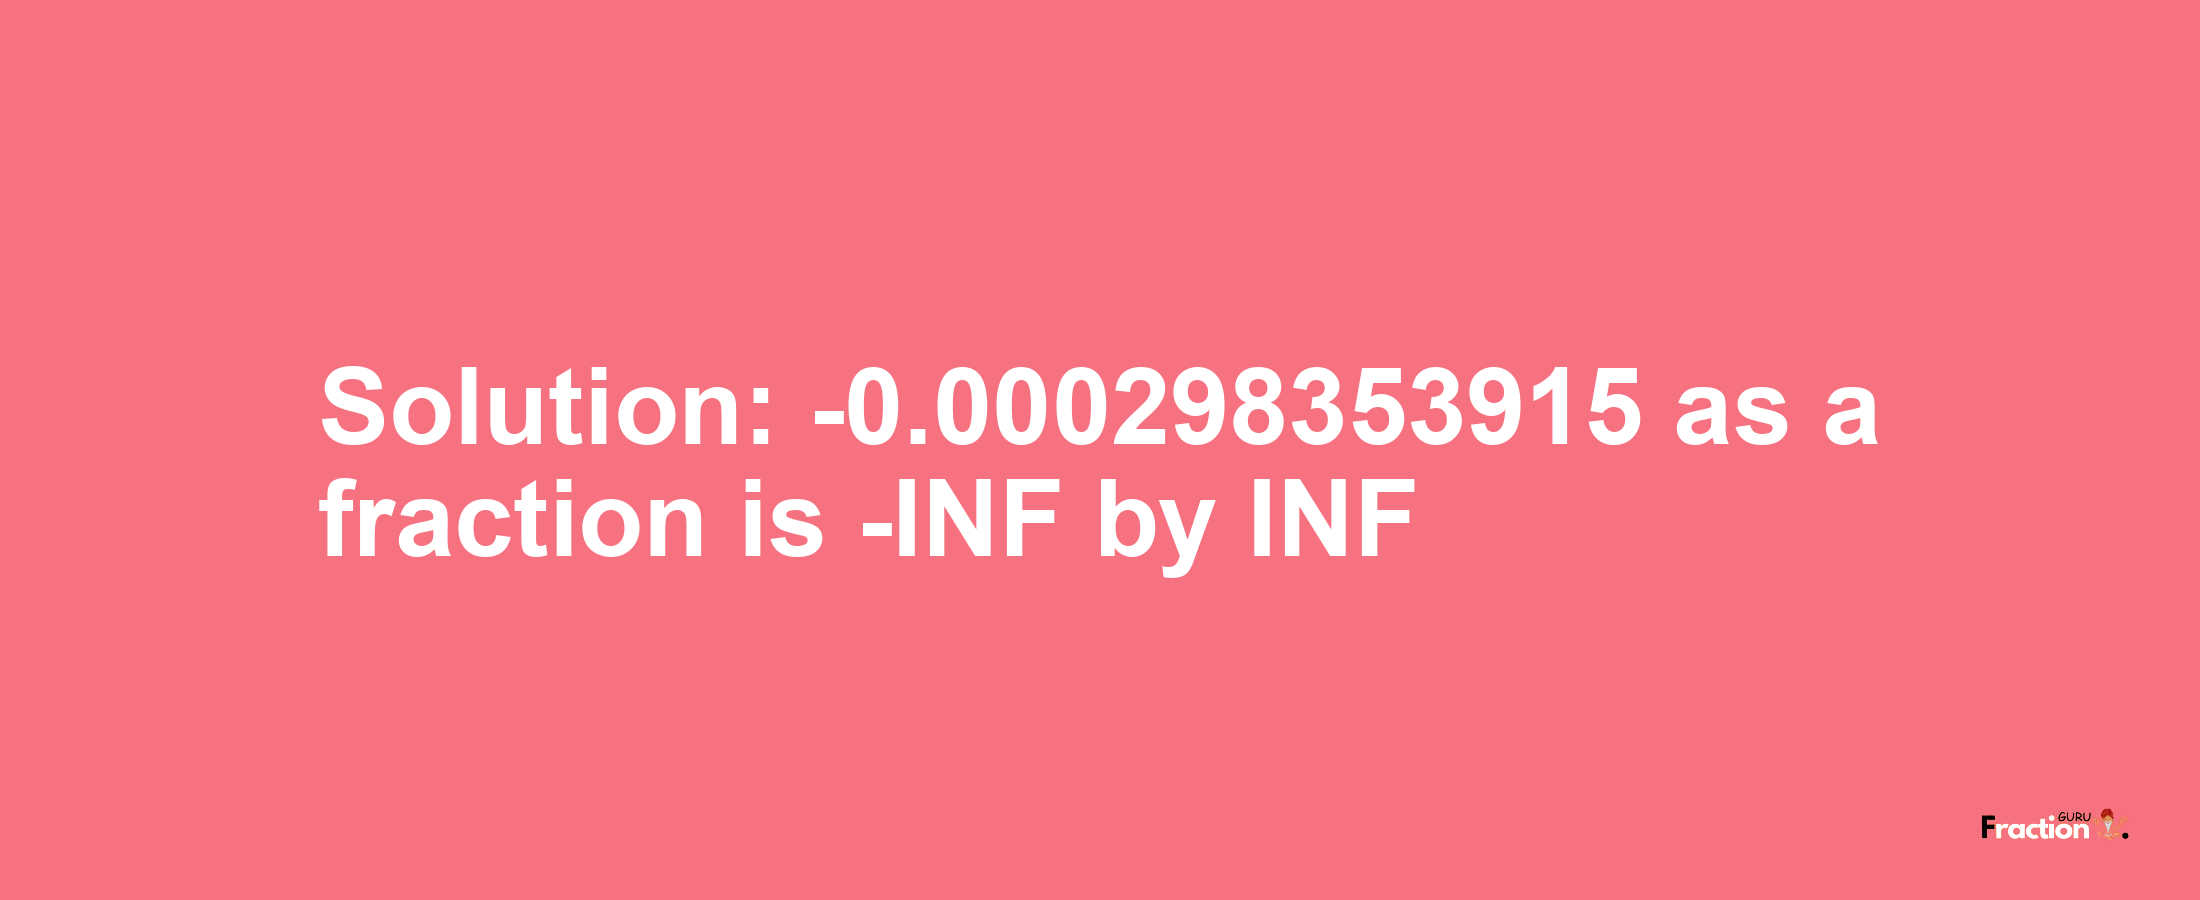 Solution:-0.000298353915 as a fraction is -INF/INF